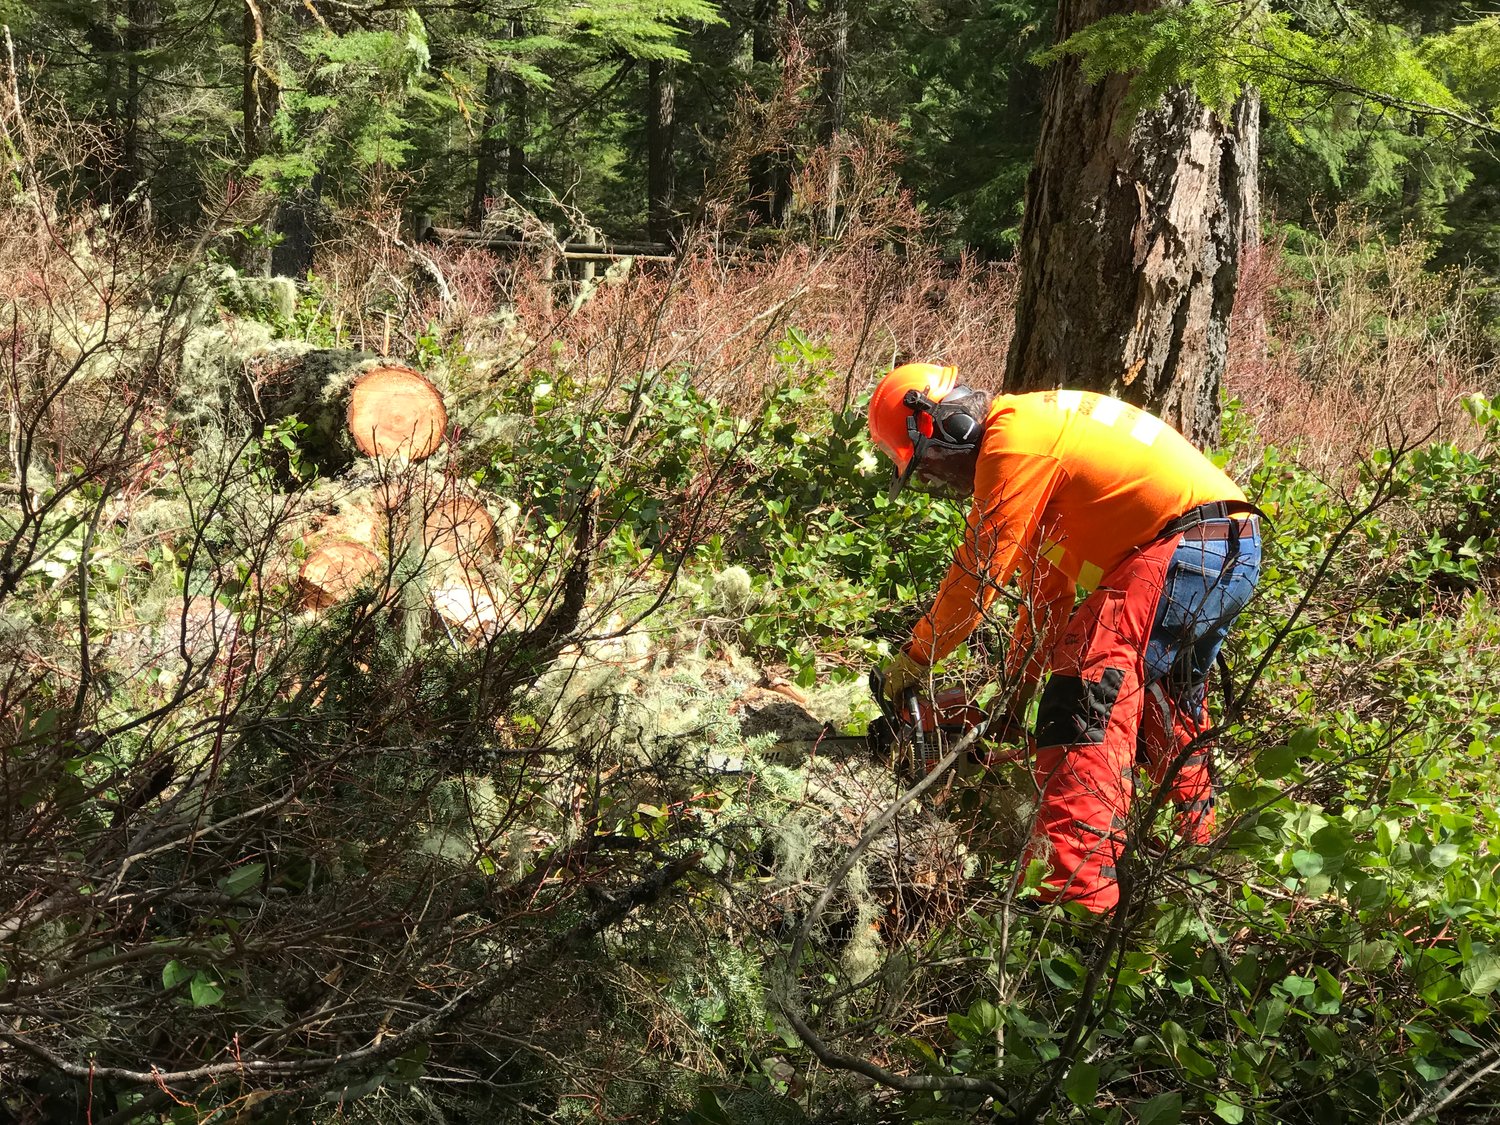 Glenn Hallberg cuts out downed hazard trees at the Kalama Horse Camp during a Mount St. Helens Chapter regional work party.